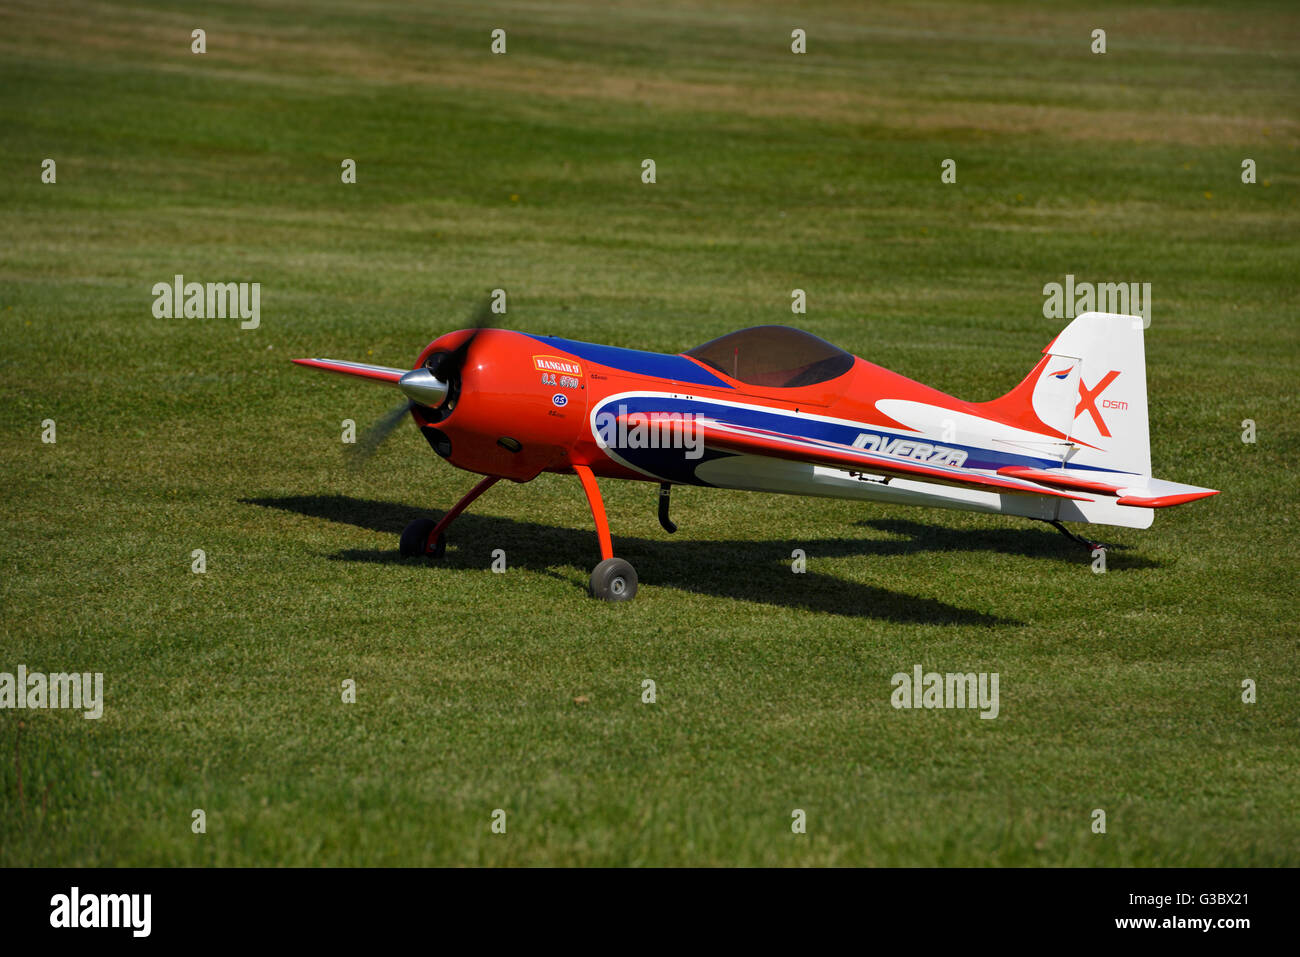 Radio controlled single propeller aircraft taxiing on grass runway Stock Photo